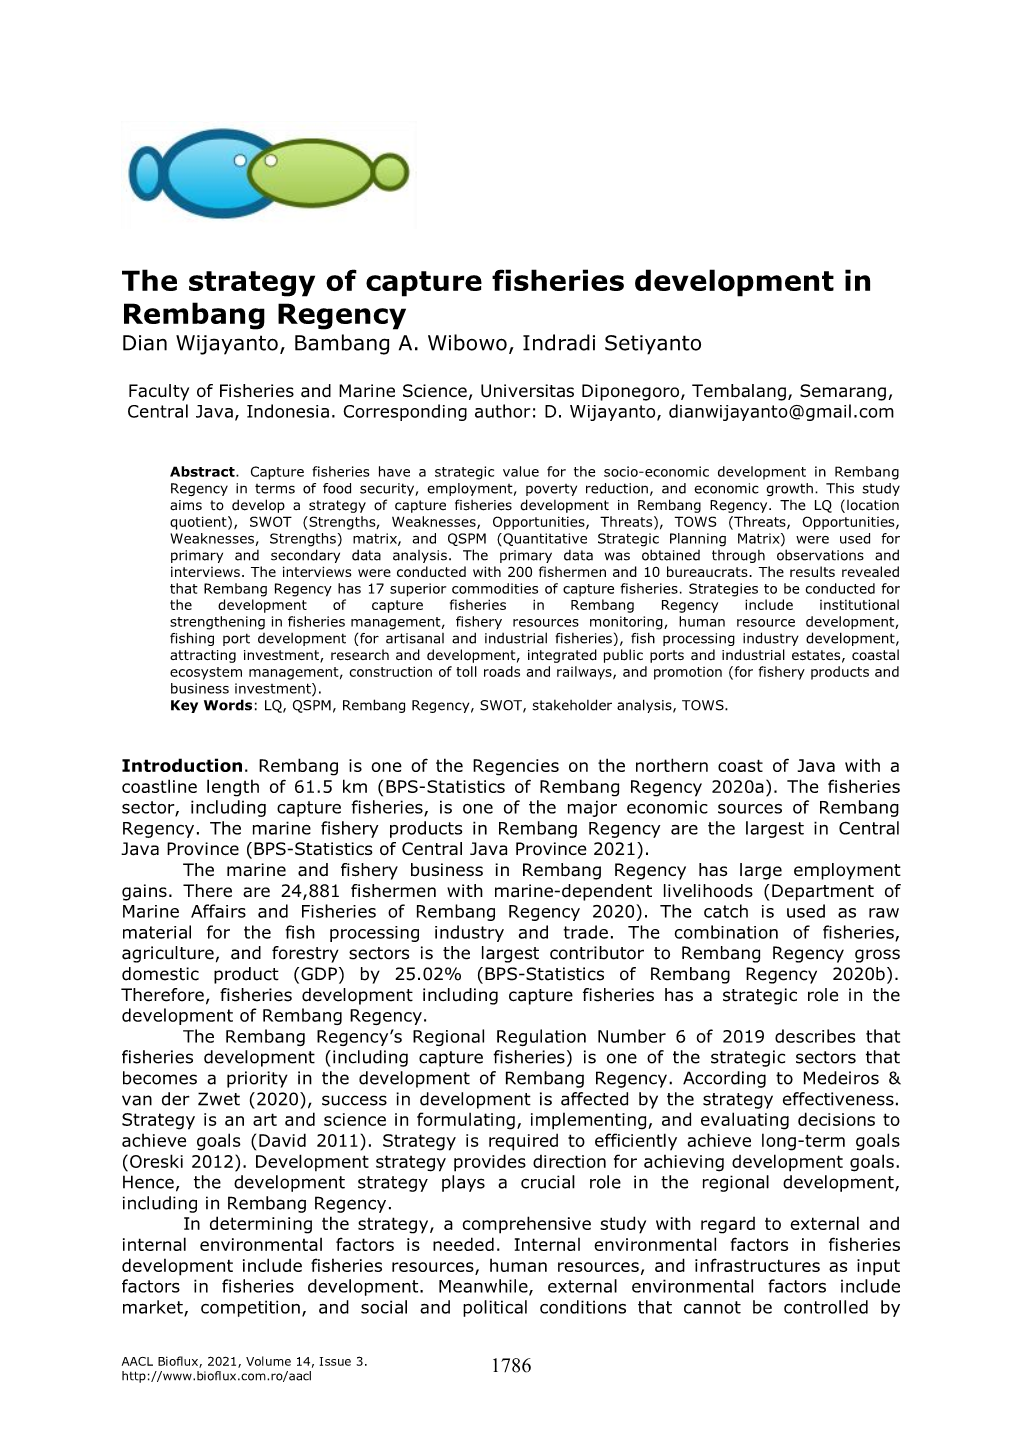 The Strategy of Capture Fisheries Development in Rembang Regency Dian Wijayanto, Bambang A